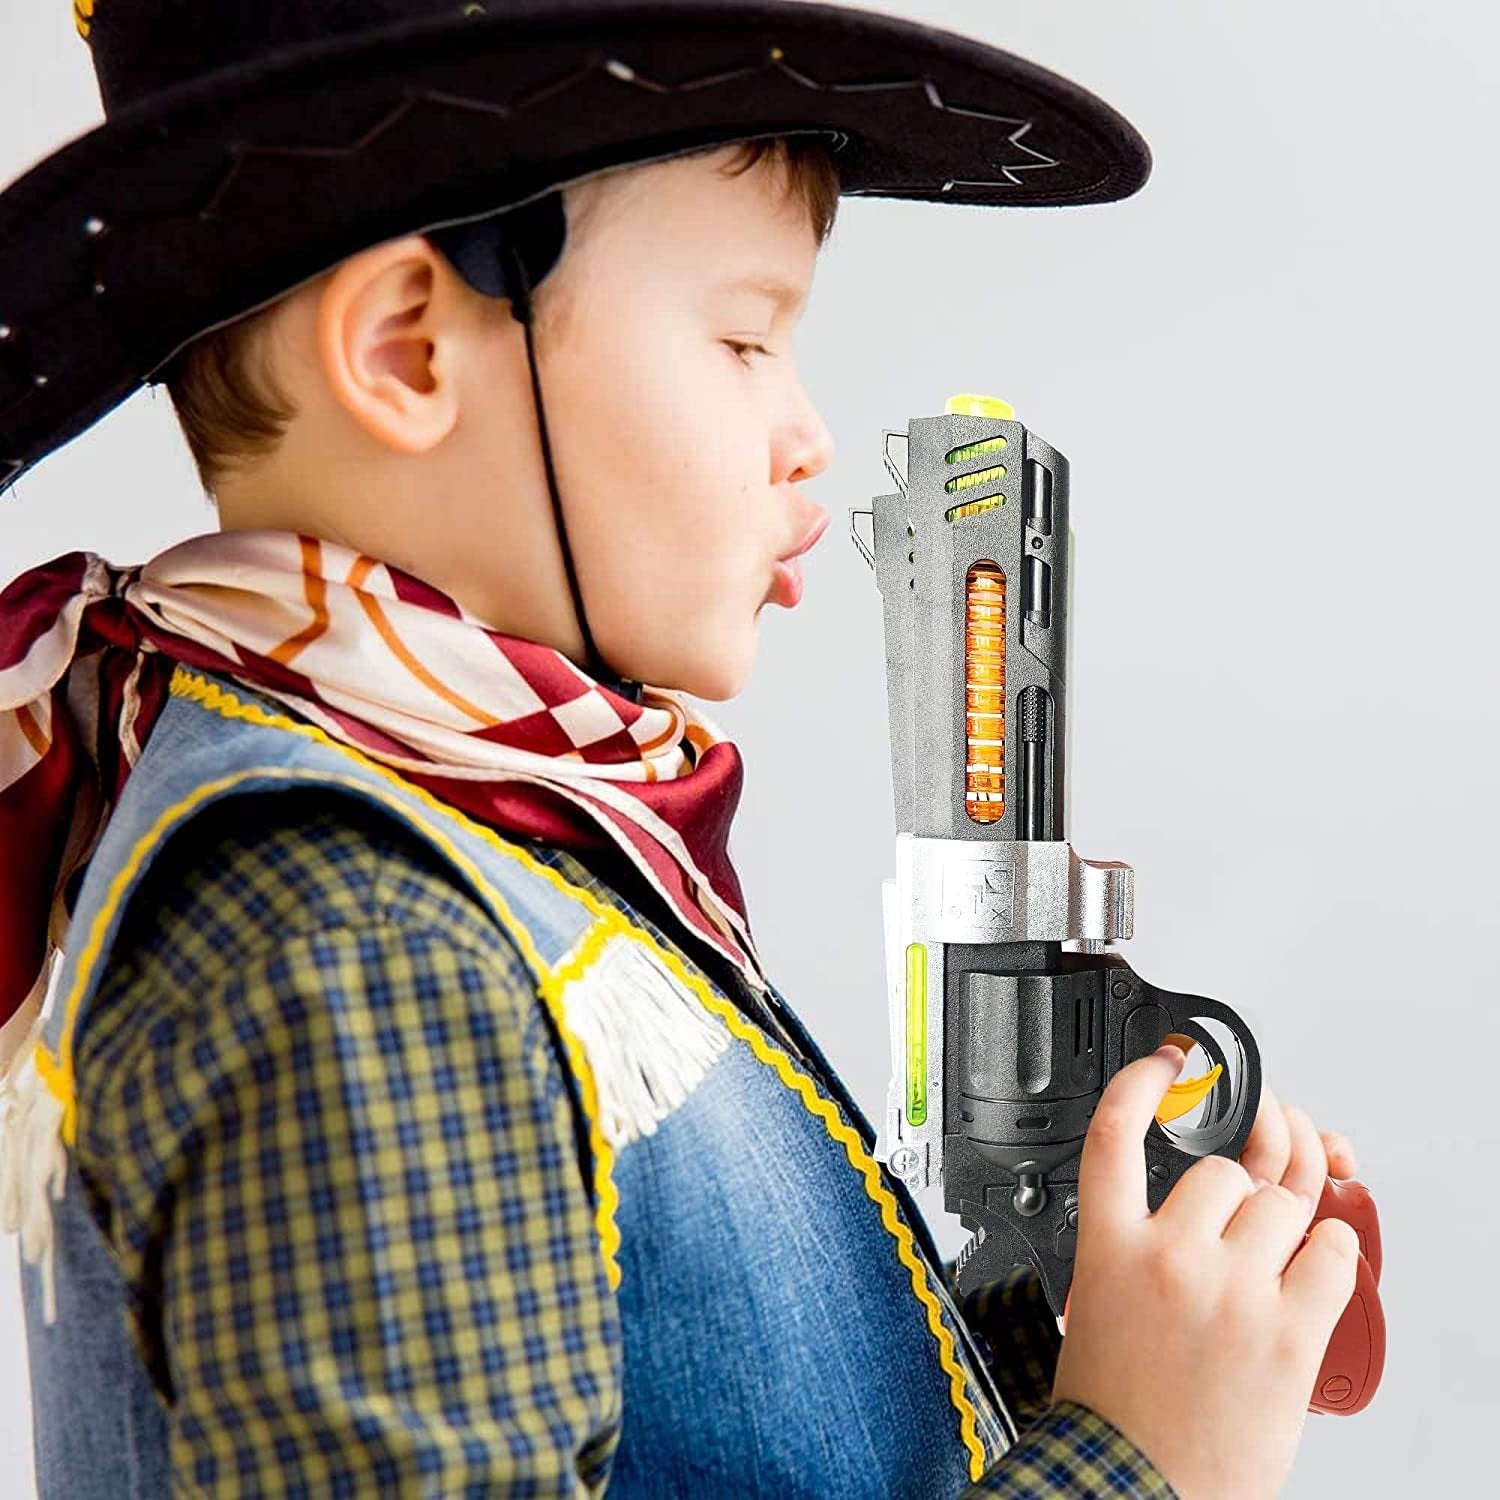 Pistol Style Play Gun with Lights and Sound, 12" Revolver with Cool LED Effects and Realistic Firing Sounds, Great Birthday Gift for Kids - Batteries Not Included